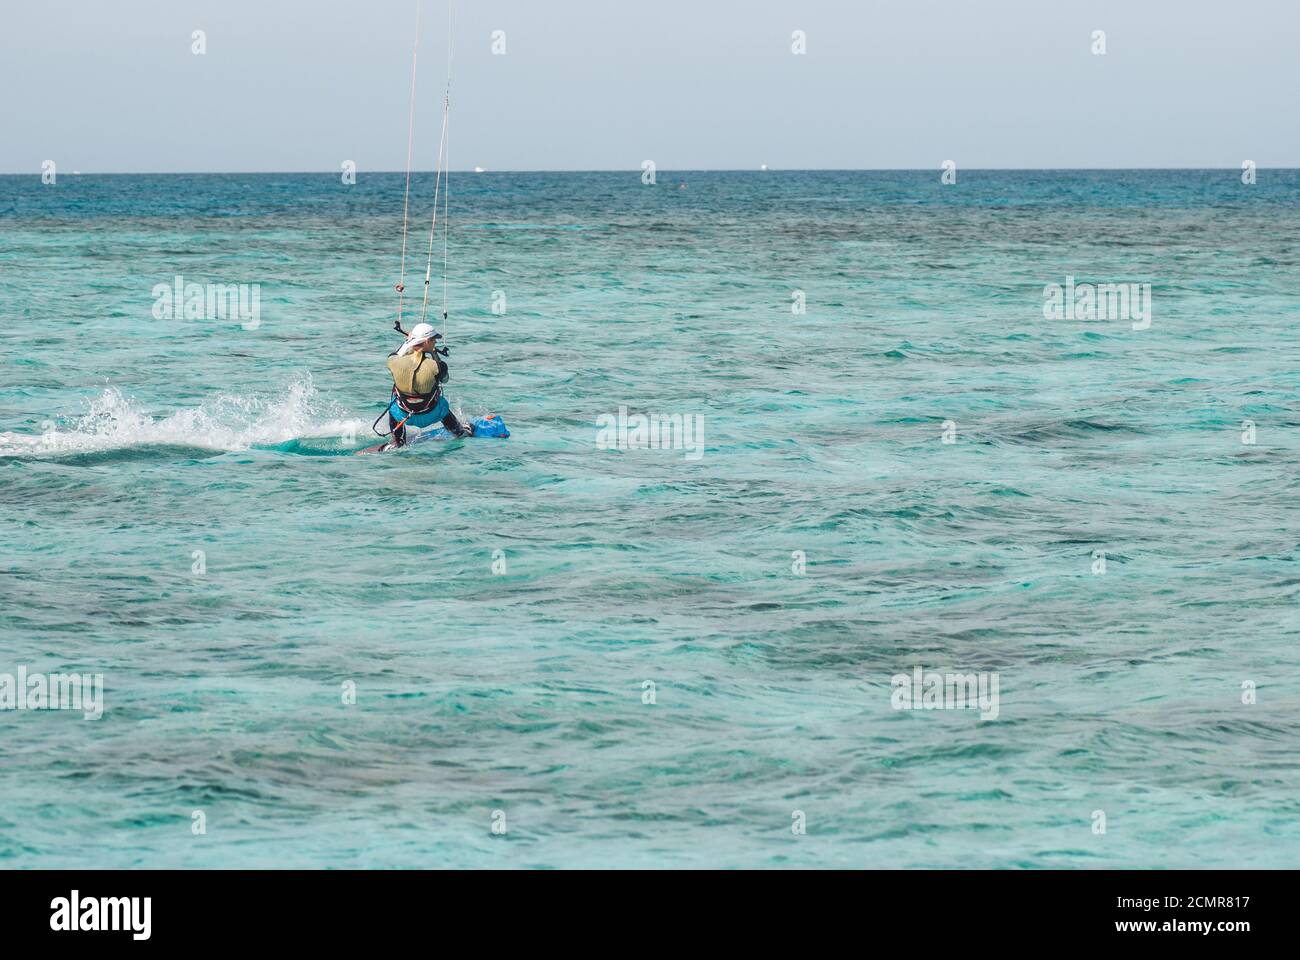 professional kiter glide the water surface of the ocean at great speed. Back view behind wide shot Stock Photo